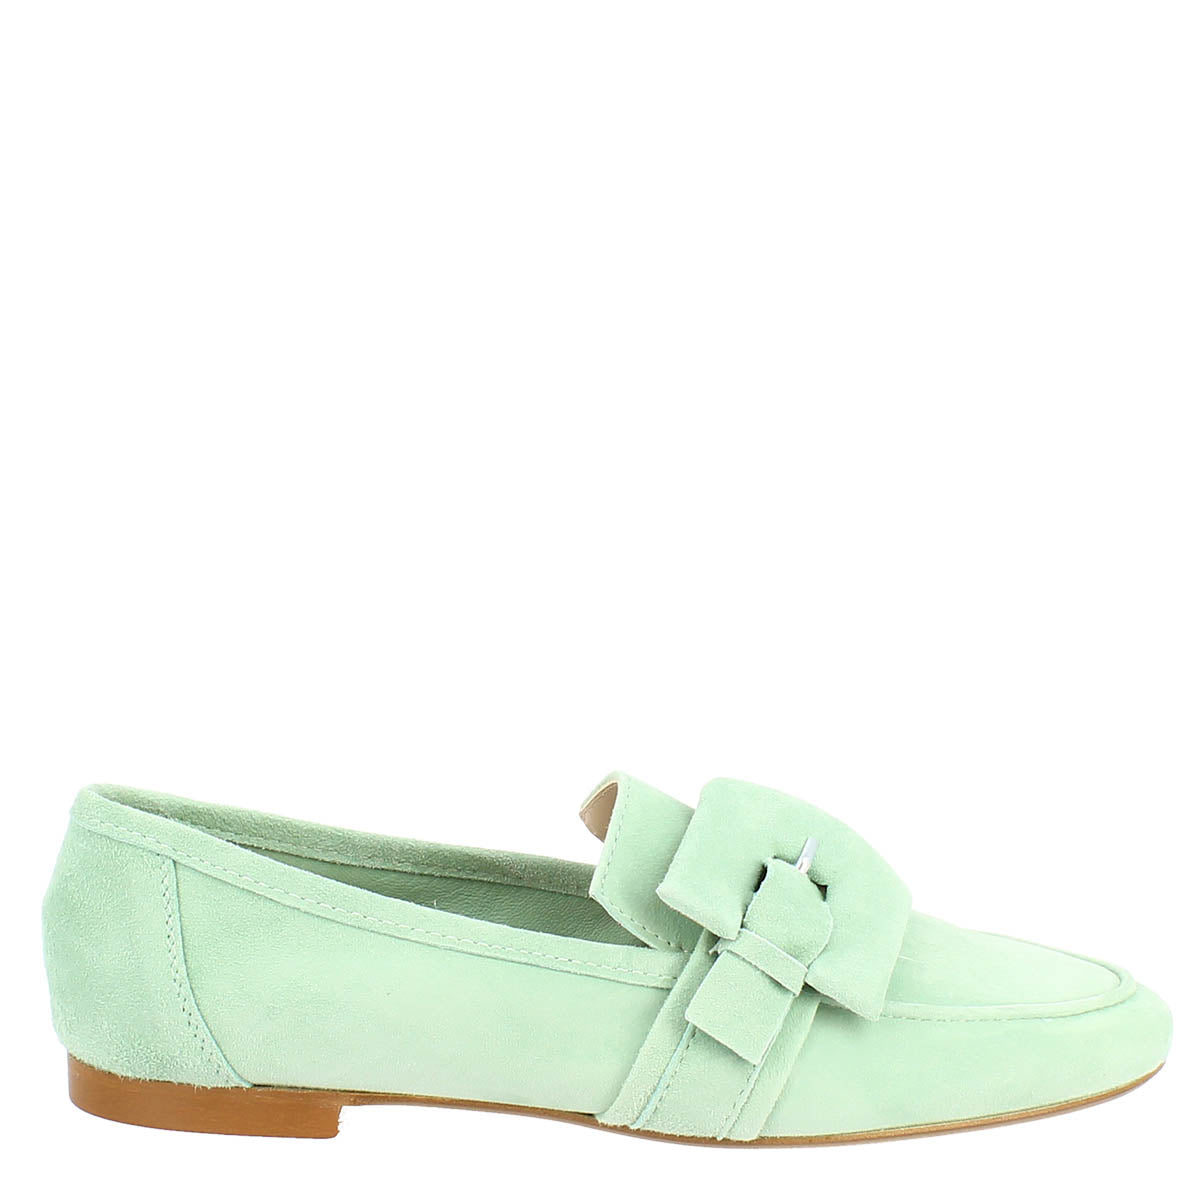 Women's moccasin in mint-colored suede.